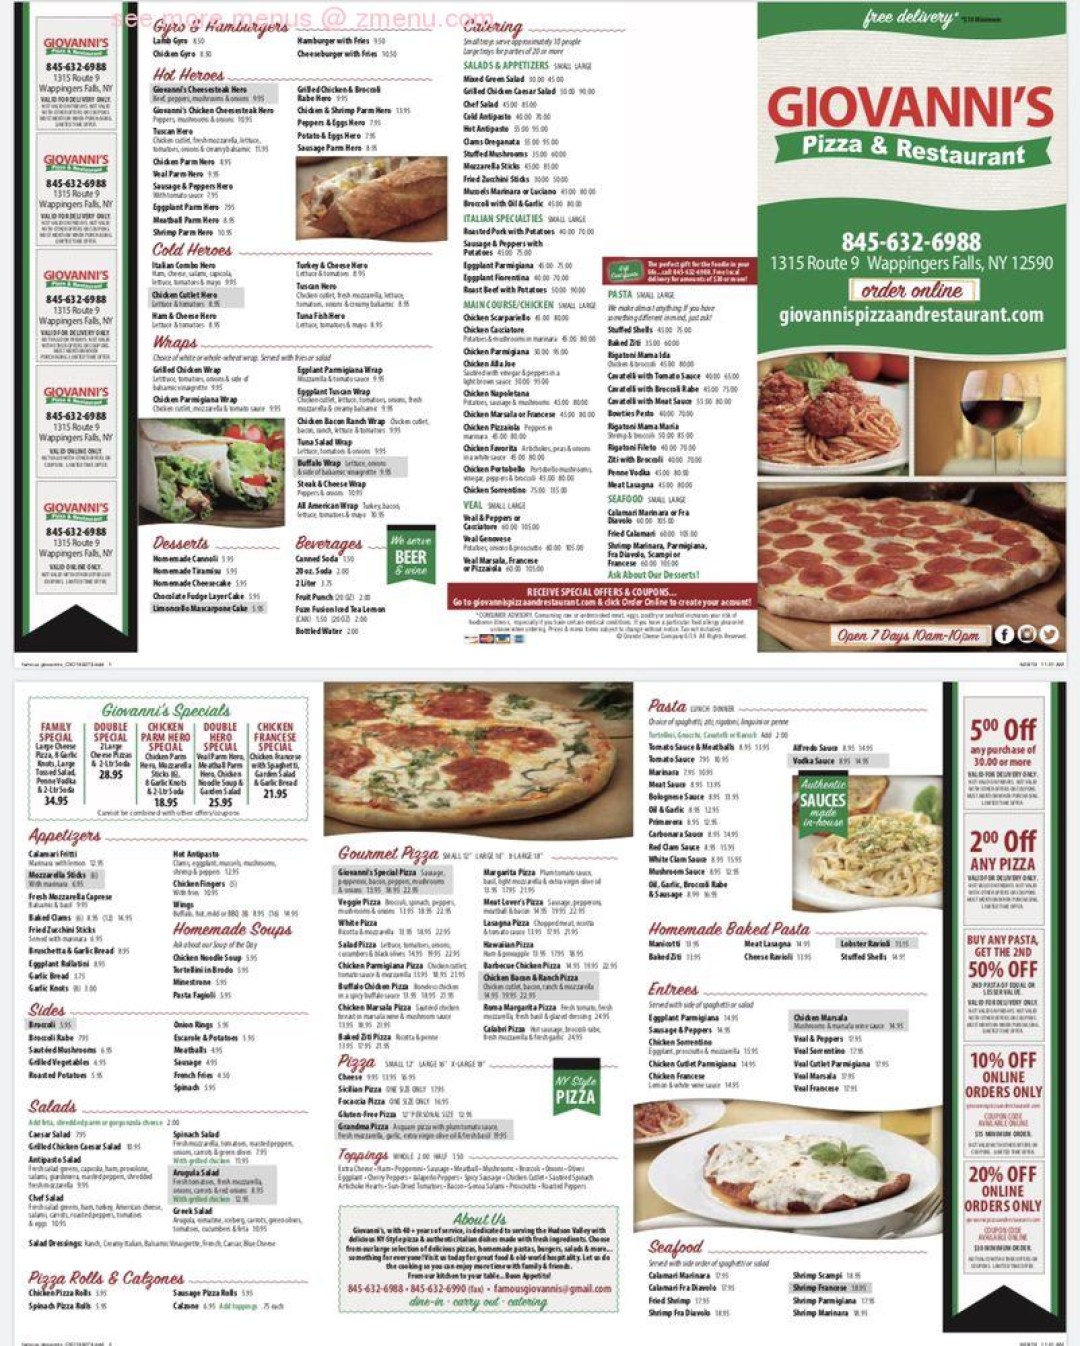 Picture of: Online Menu of Giovannis Pizza & Restaurant Restaurant, Wappingers